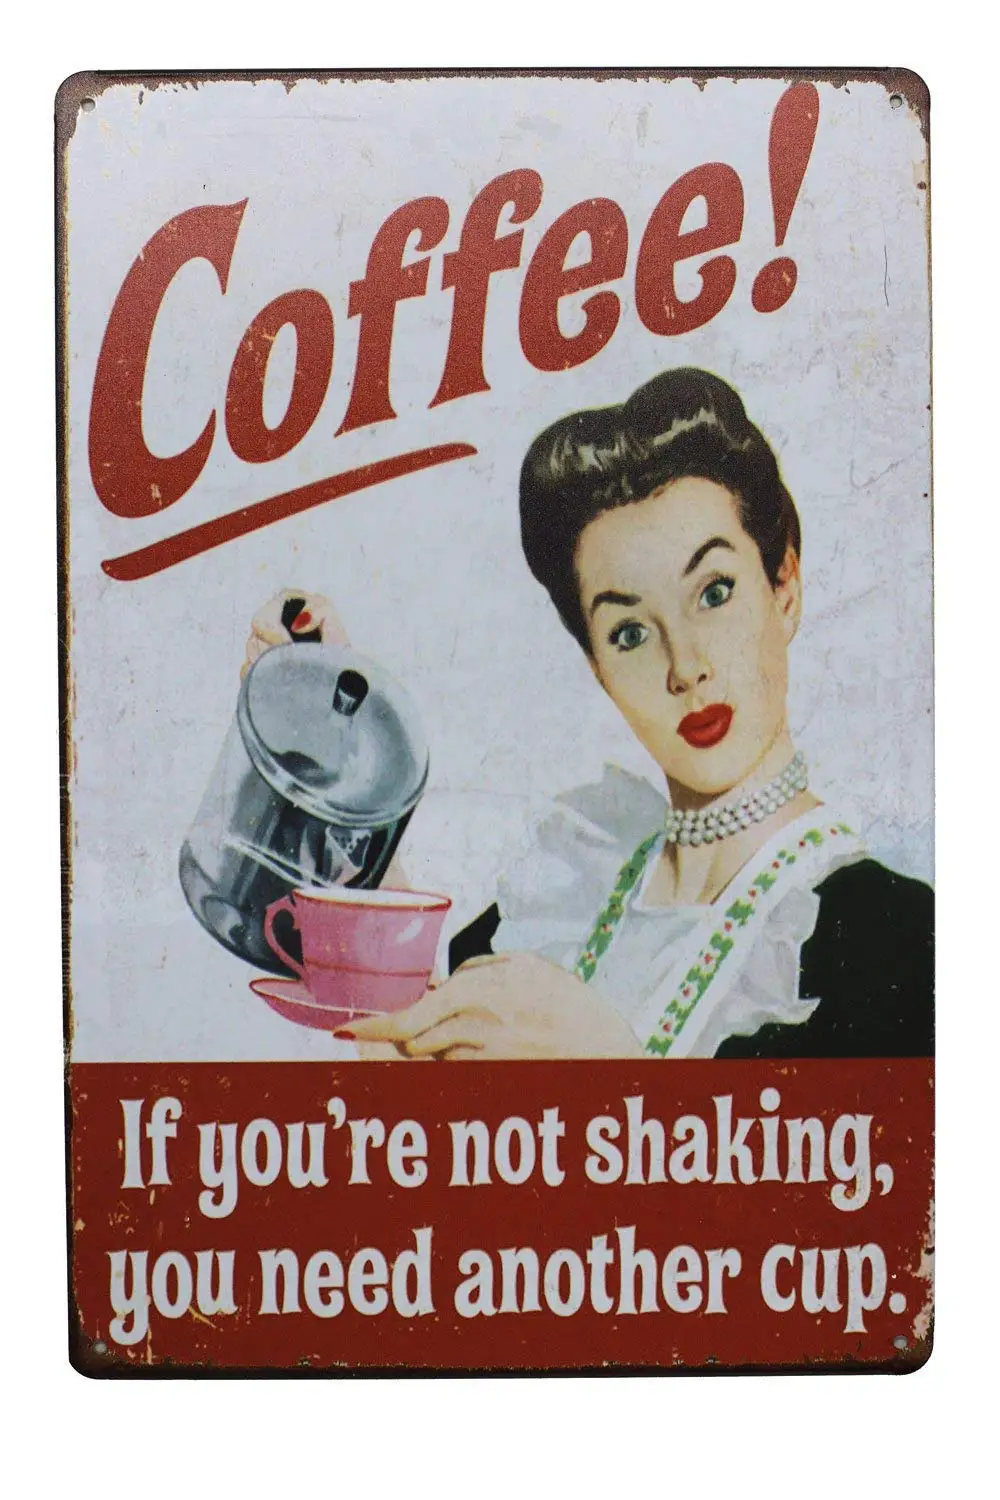 

ERLOOD Coffee If You're Not Shaking, You Need Another Cup Vintage Plaque Poster Cafe Kitchen Home Wall Decor Metal Tin Sign 8 x